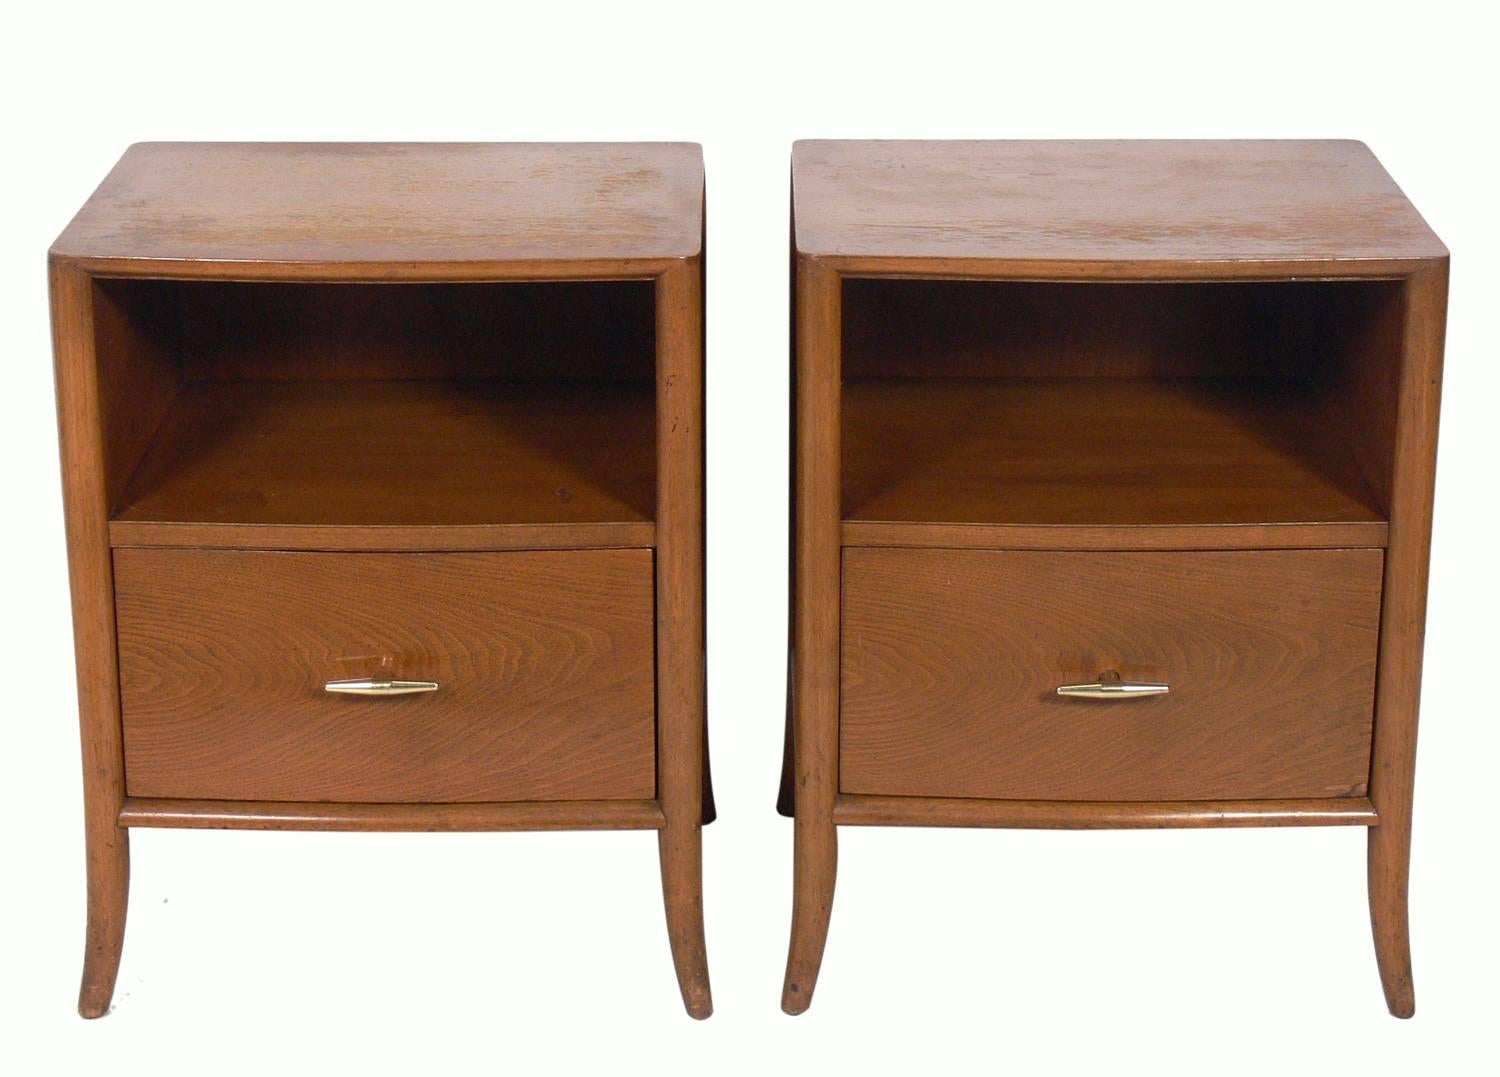 Pair of walnut and brass nightstands or end tables, designed by T.H. Robsjohn-Gibbings for Widdicomb, circa 1950s. They are a versatile size and can be used as nightstands, or as end or side tables. They are currently being refinished and can be